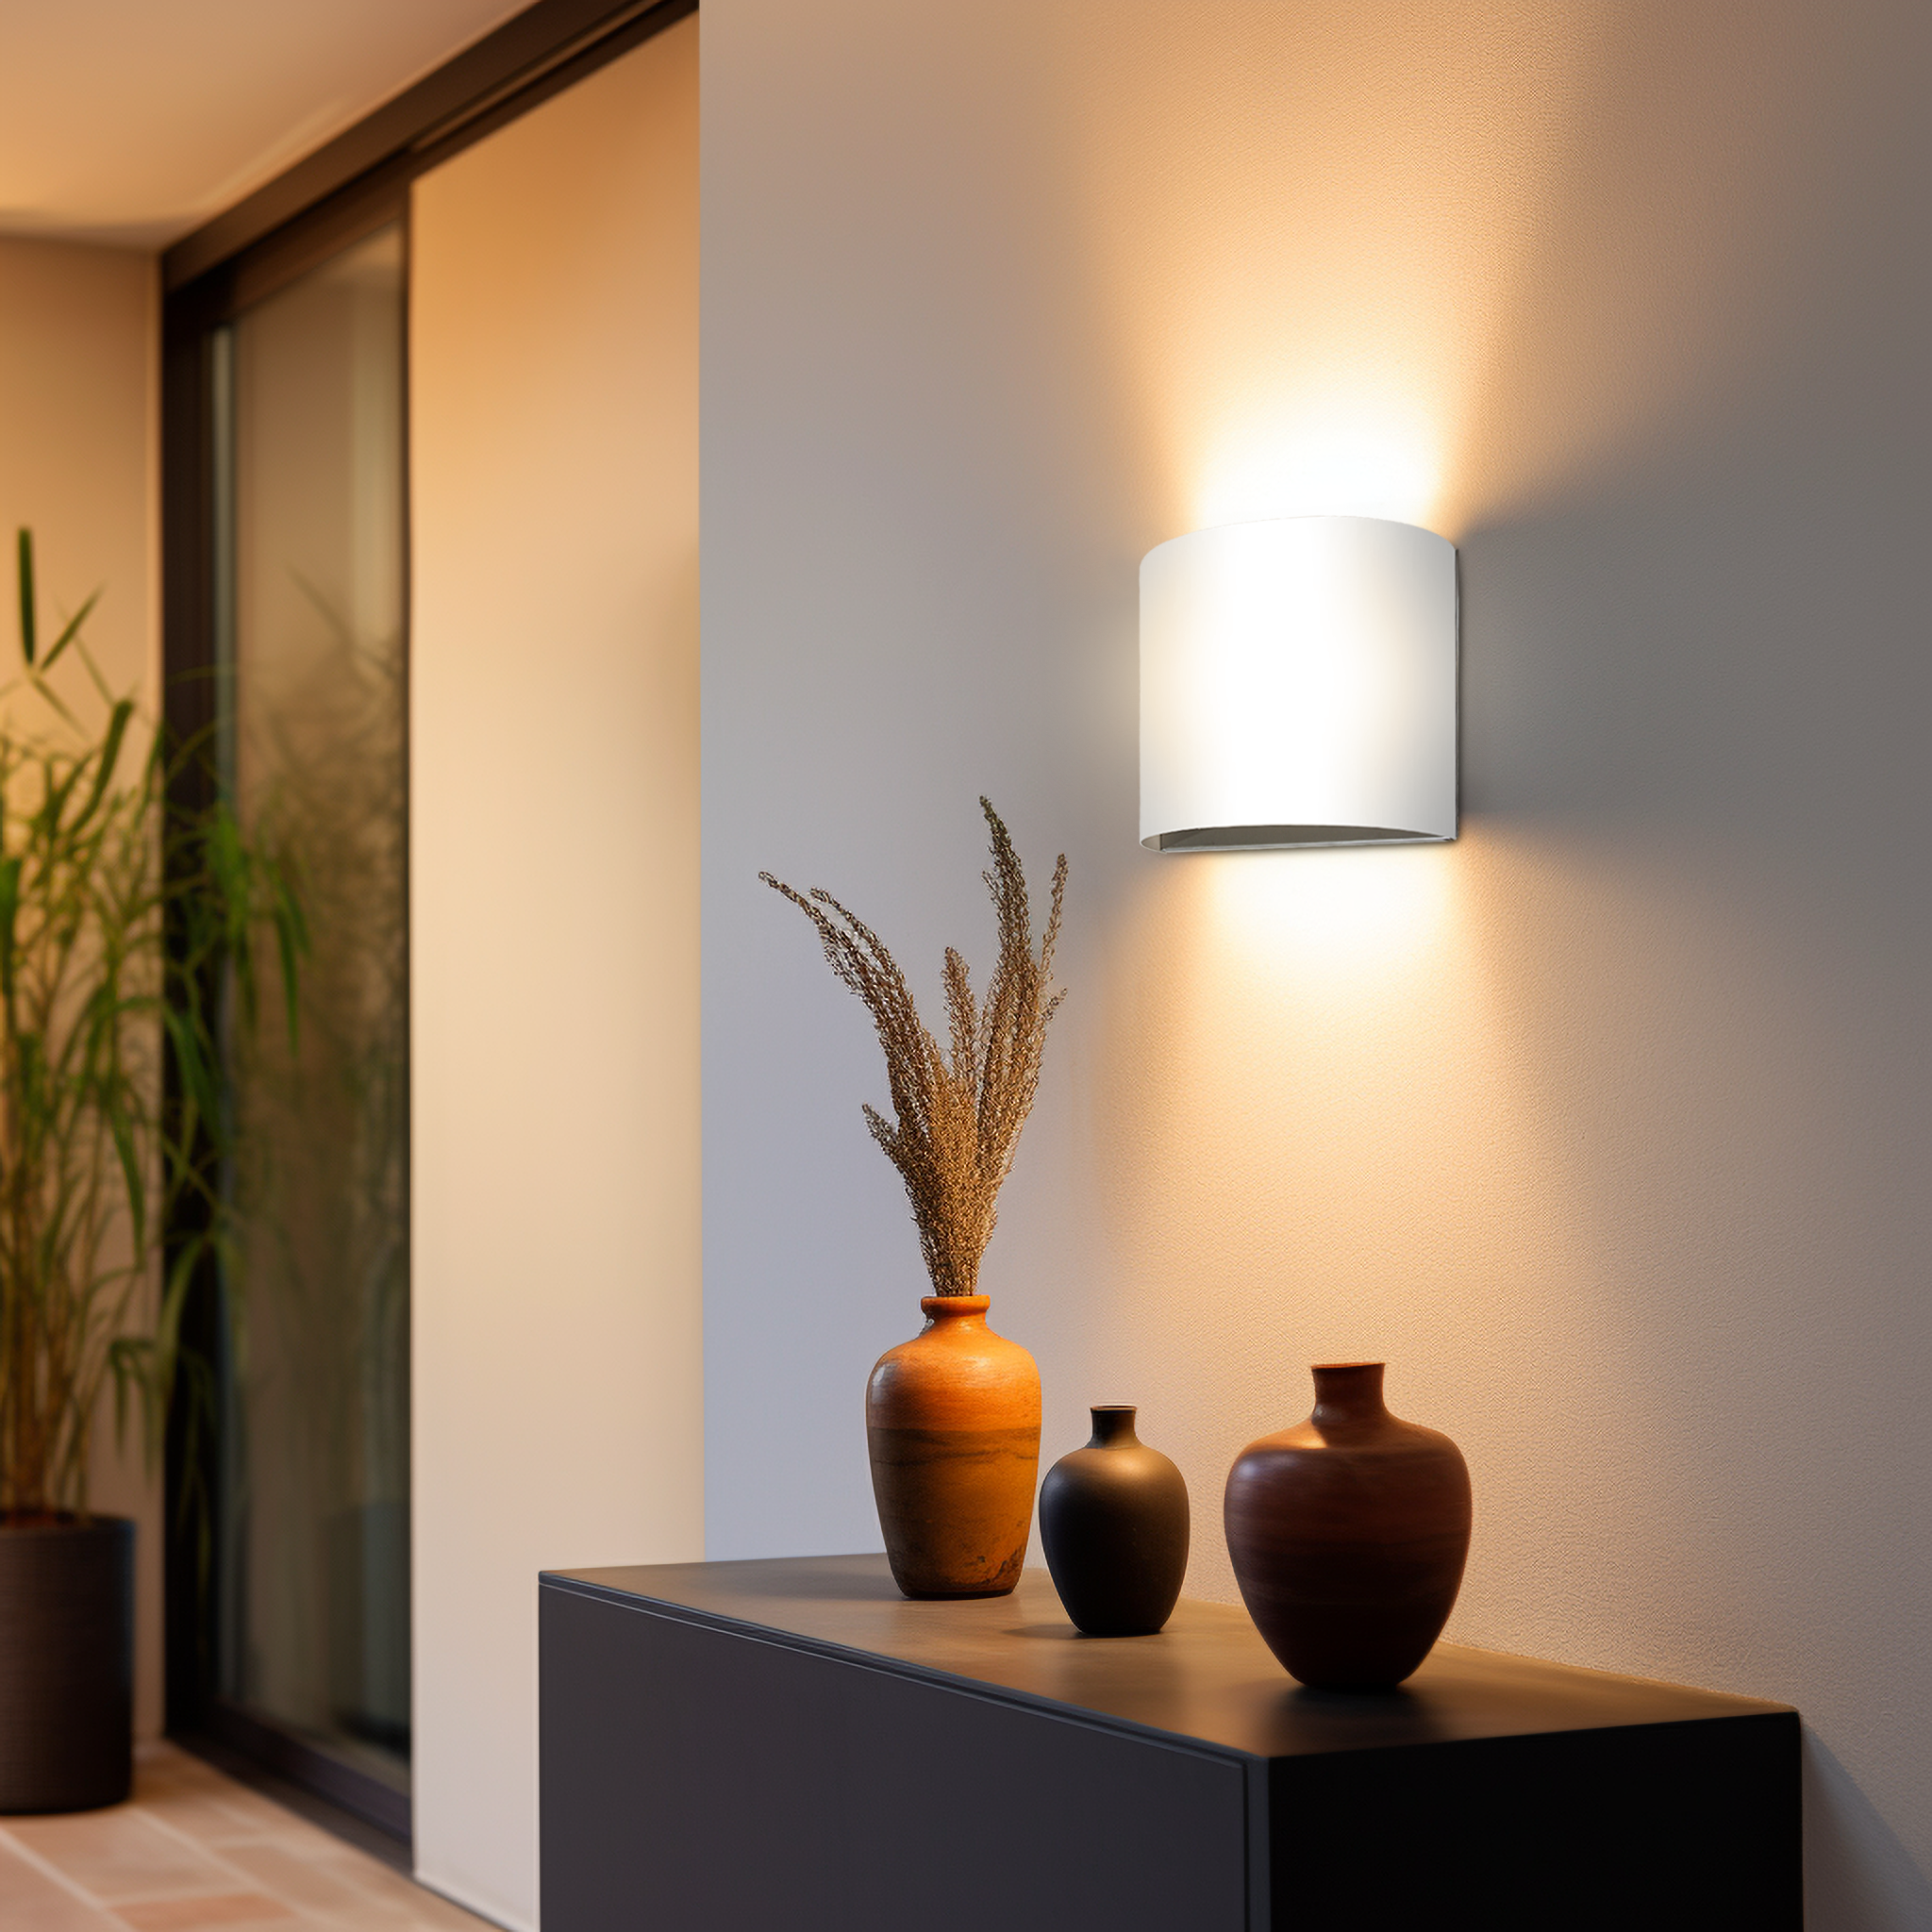 The Vita Wall Sconce from Seascape Fixtures in a living room lifestyle photograph.